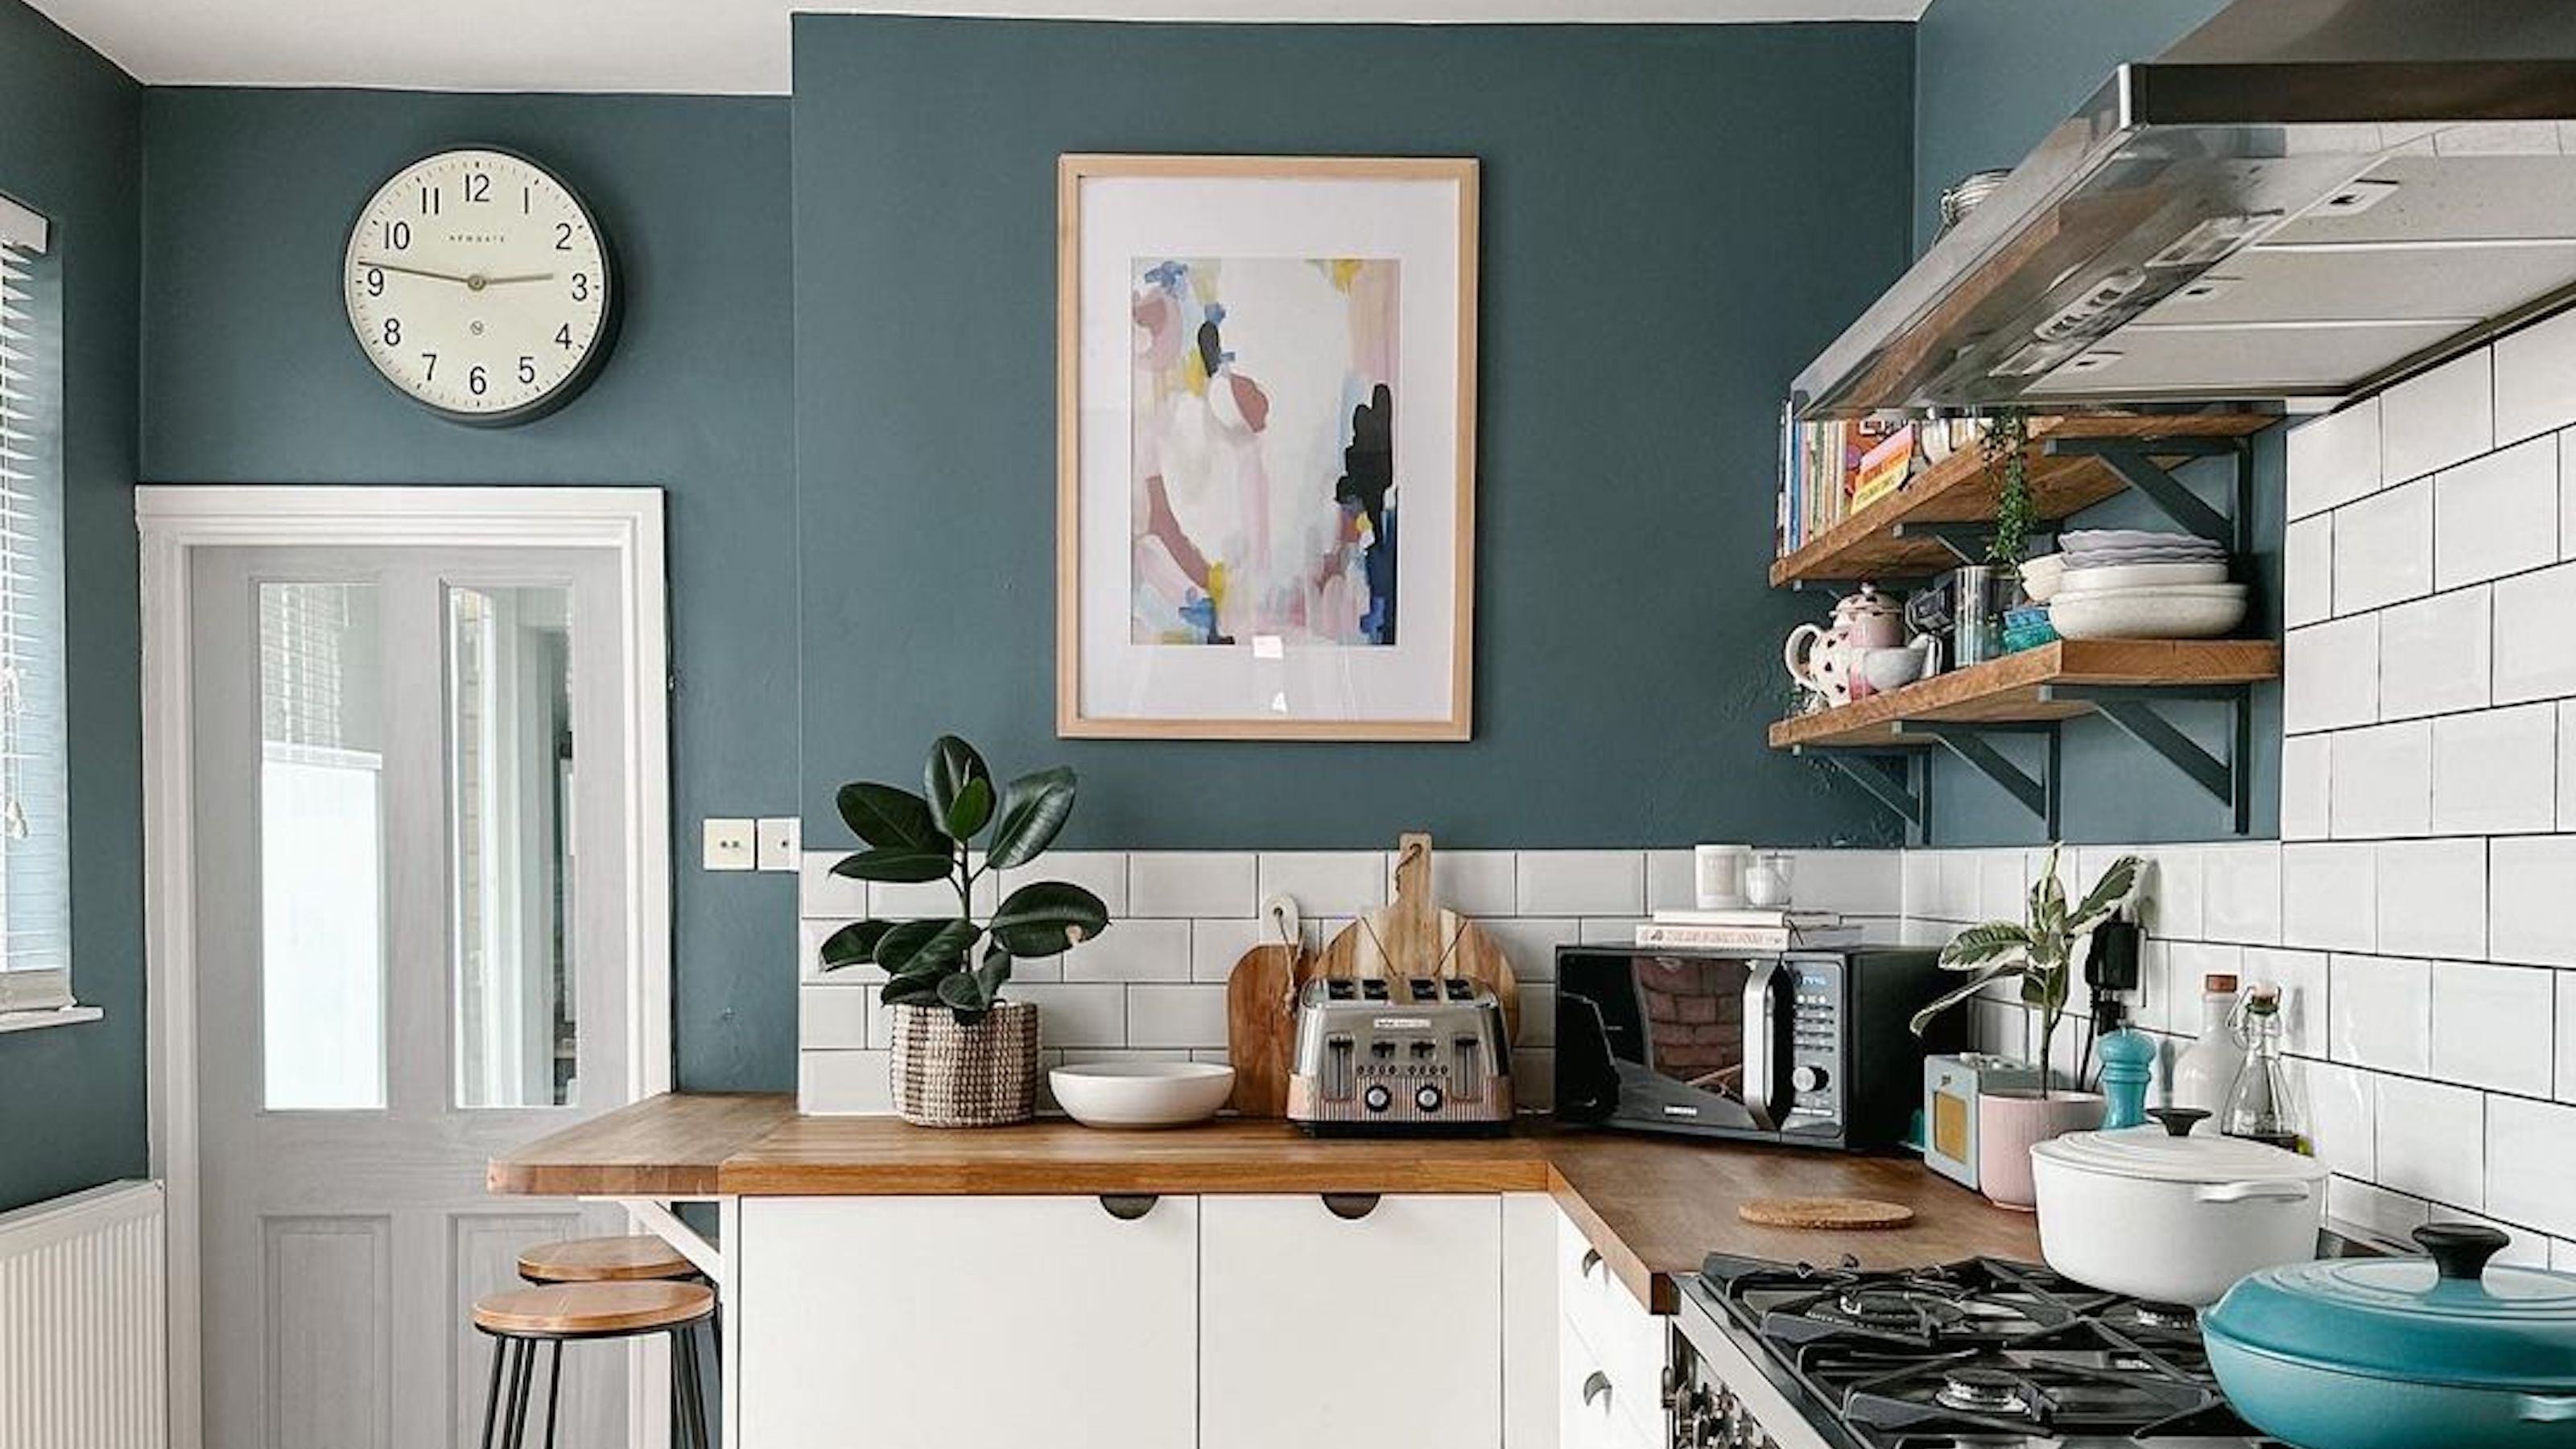 The Best Thing You Can Buy For Your Small Kitchen Cabinets